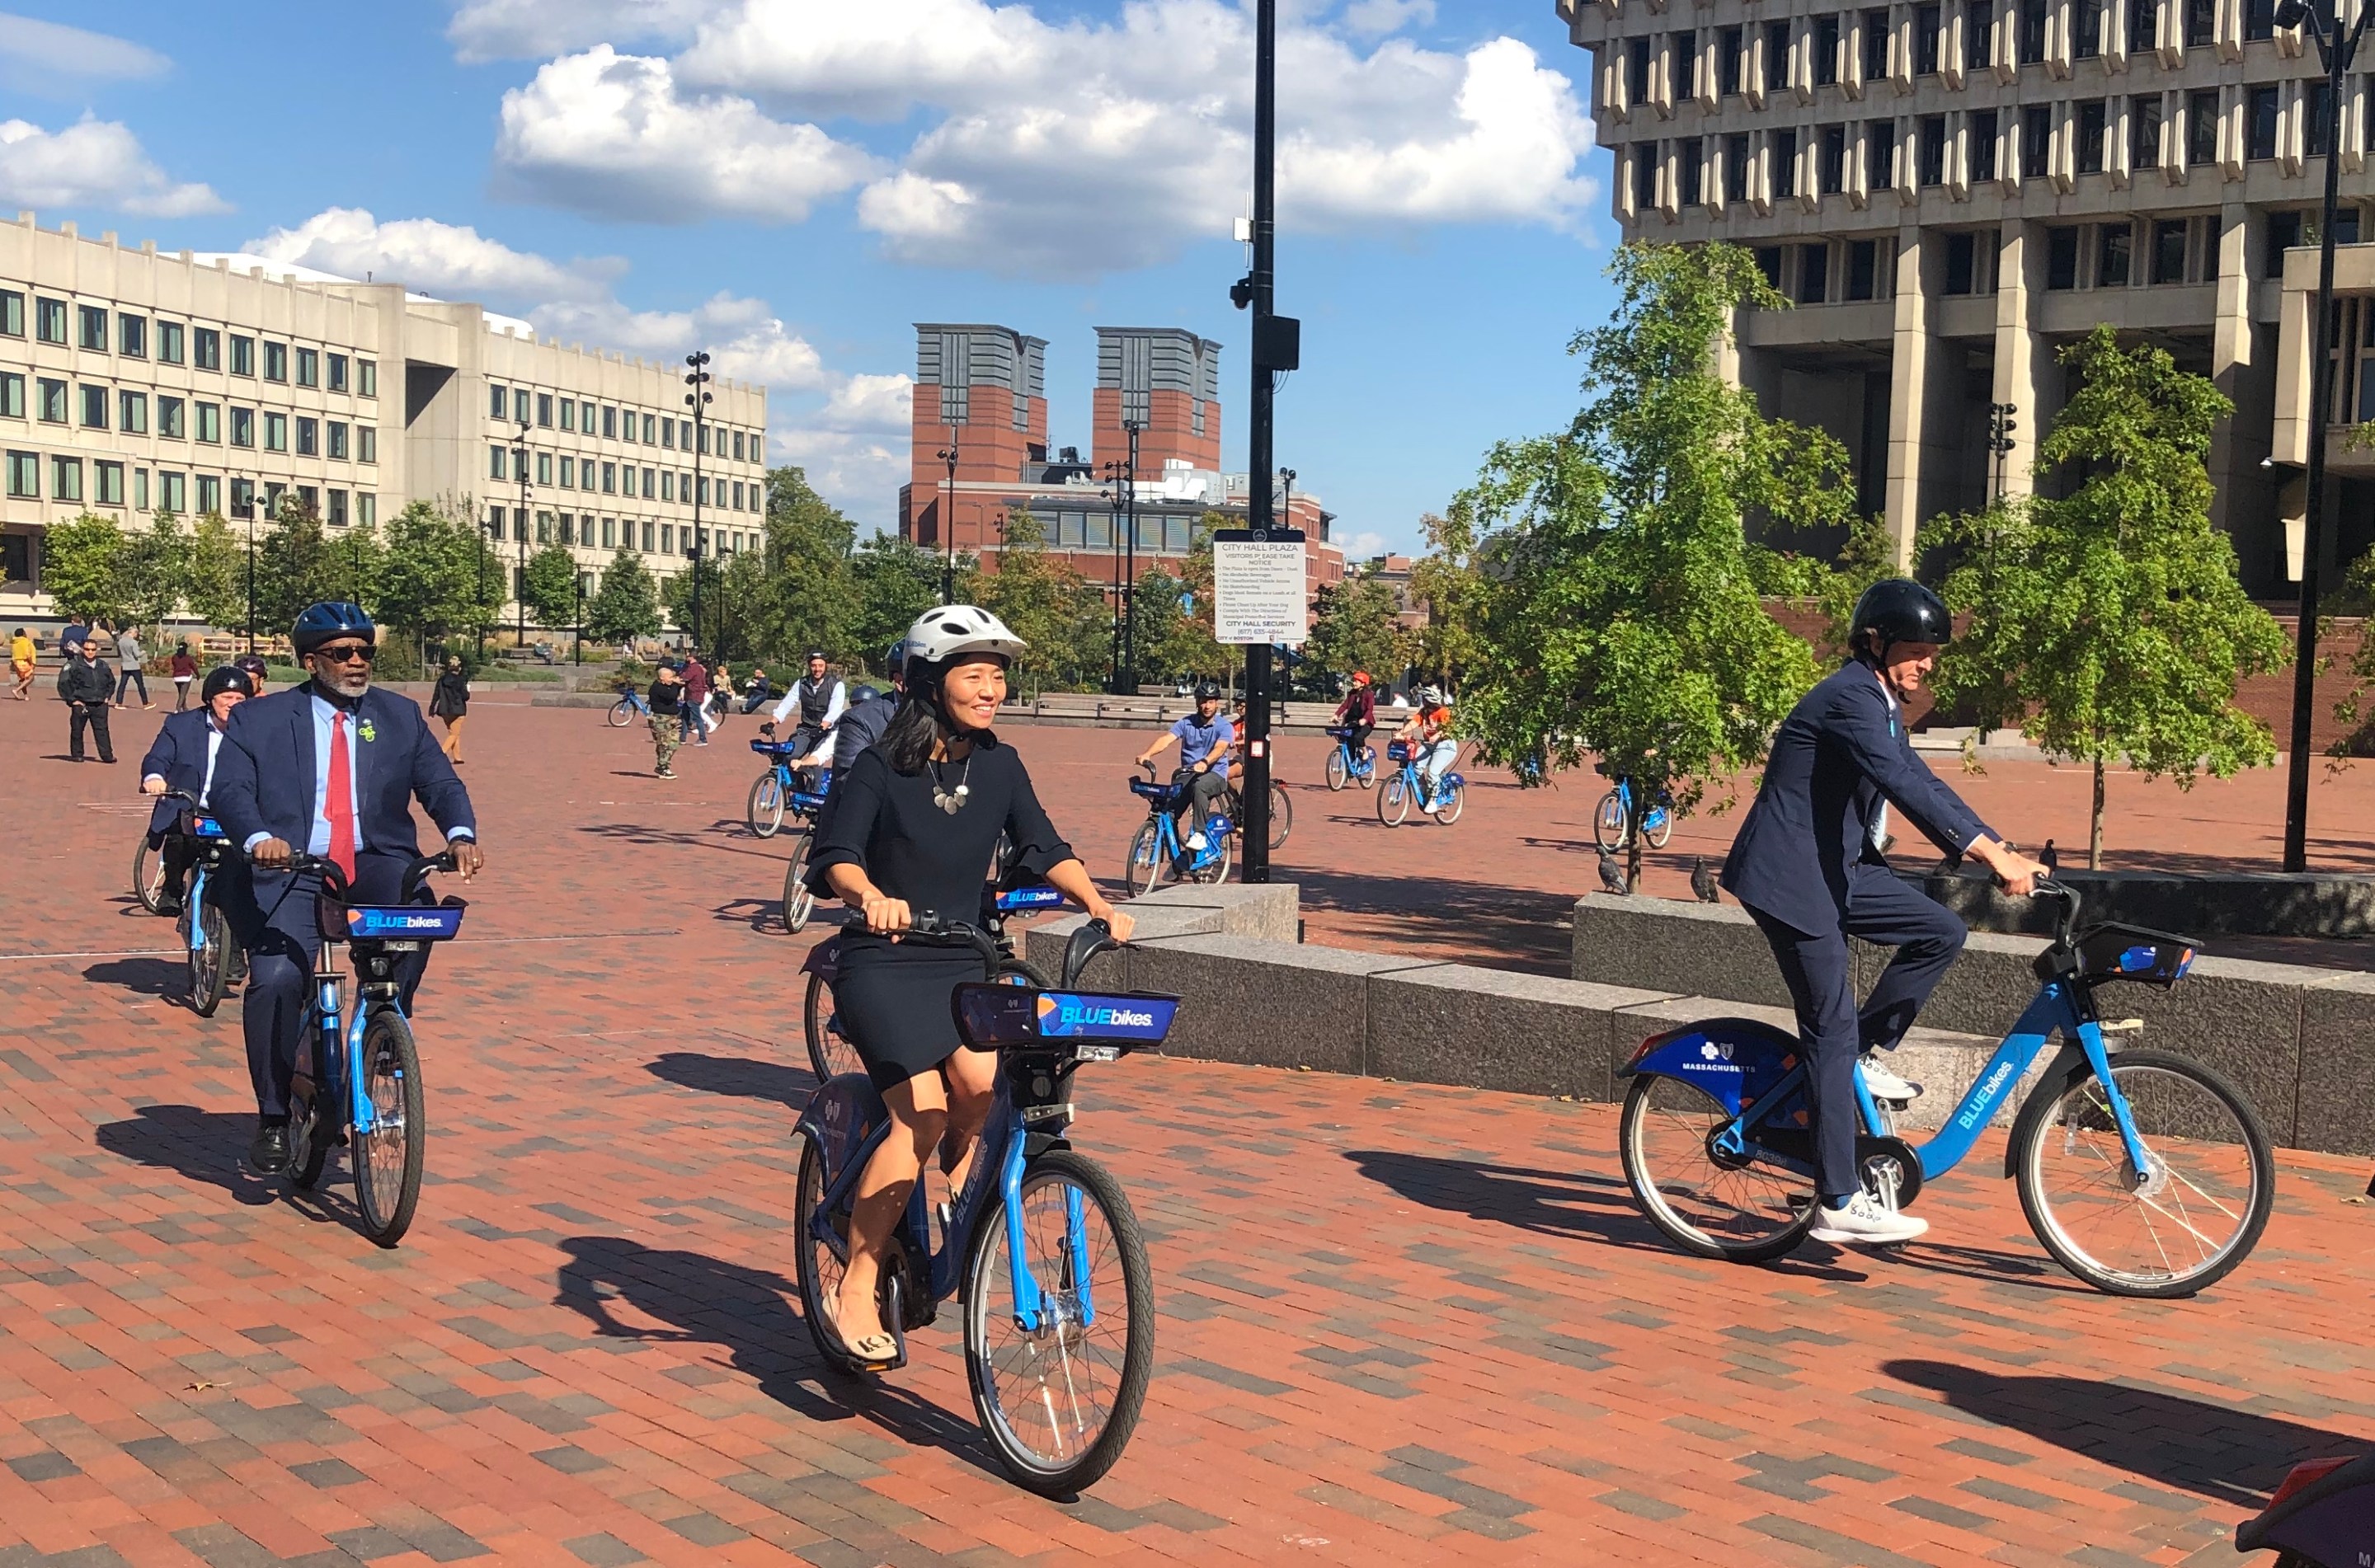 Several people in business suits ride Bluebikes across the bricks of City Hall Plaza under blue skies. Boston's concrete City Hall is visible in the right background.